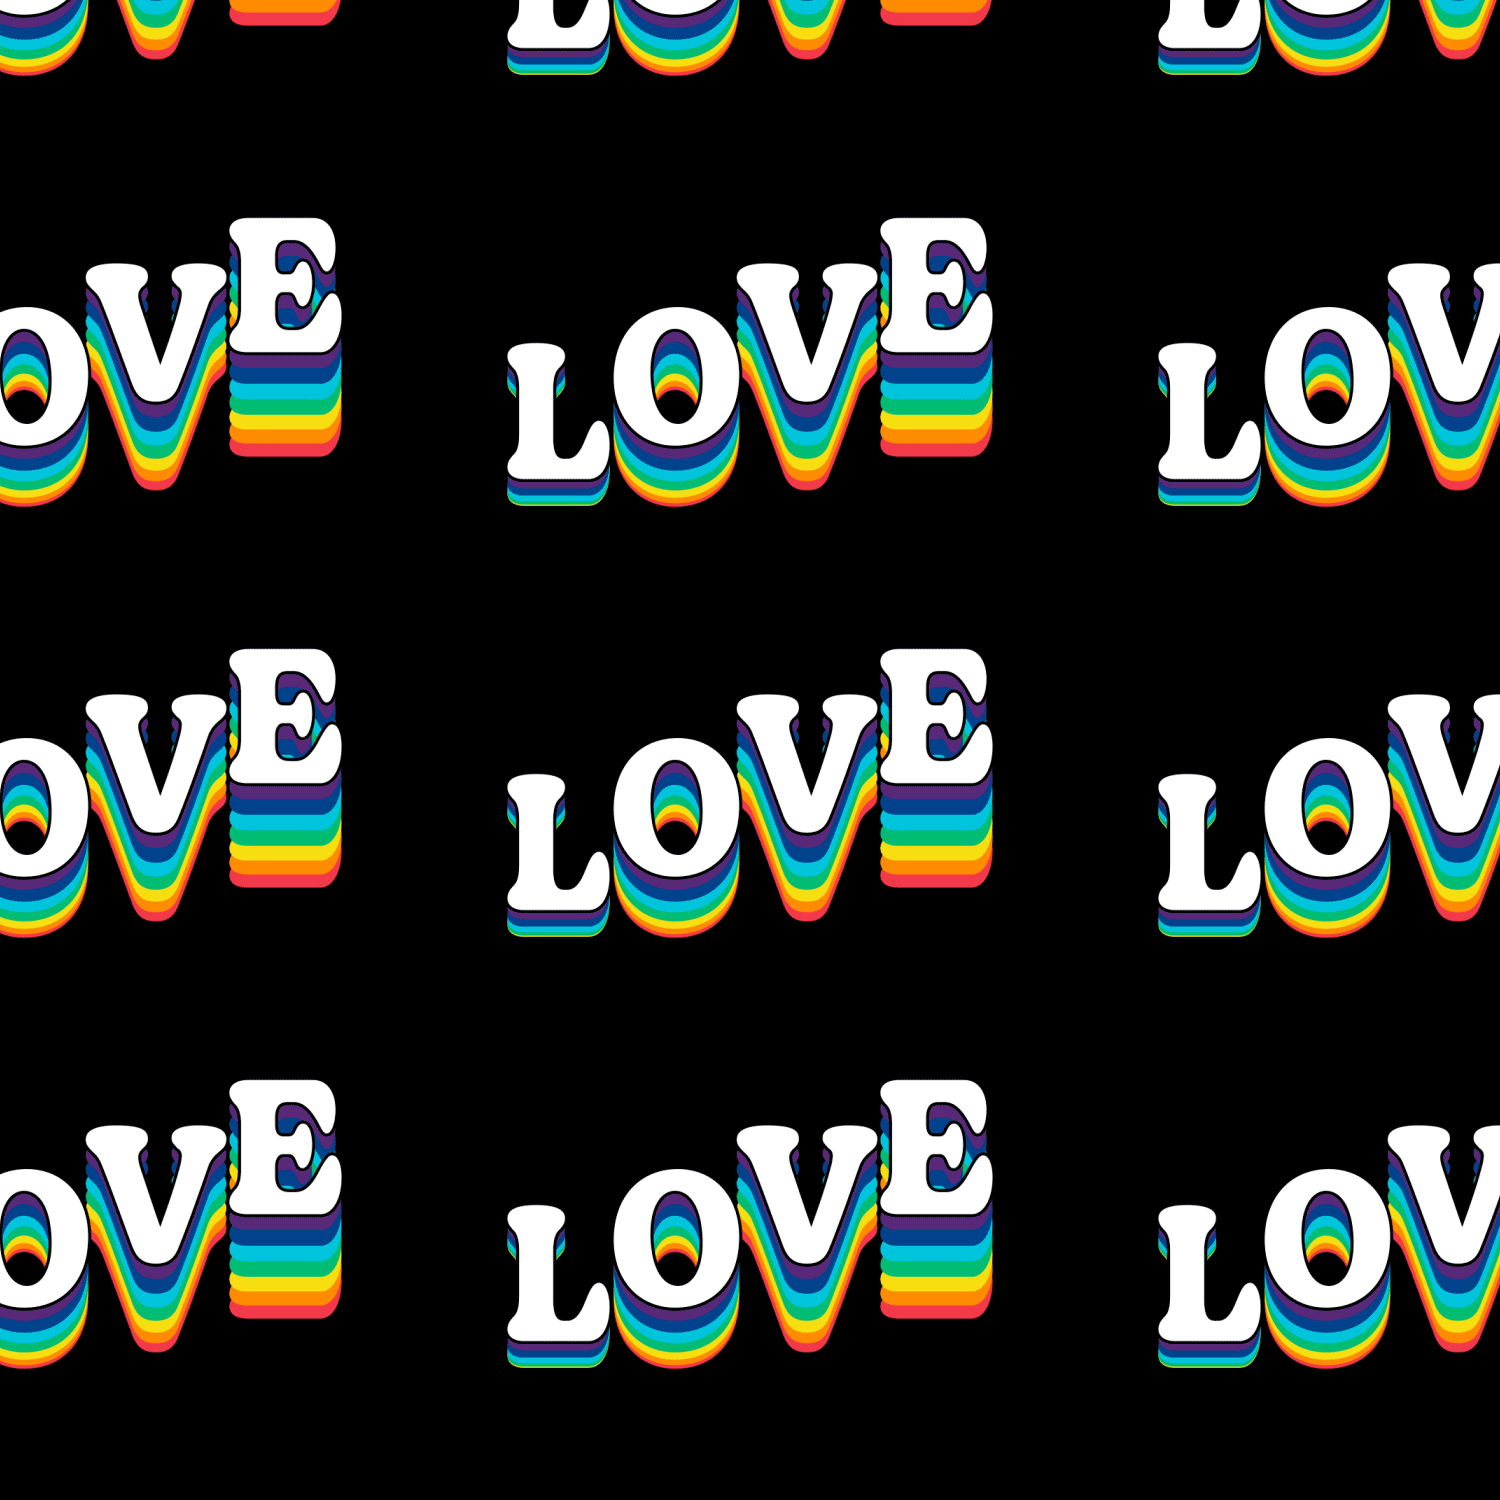 LOVE after love motion graphics type